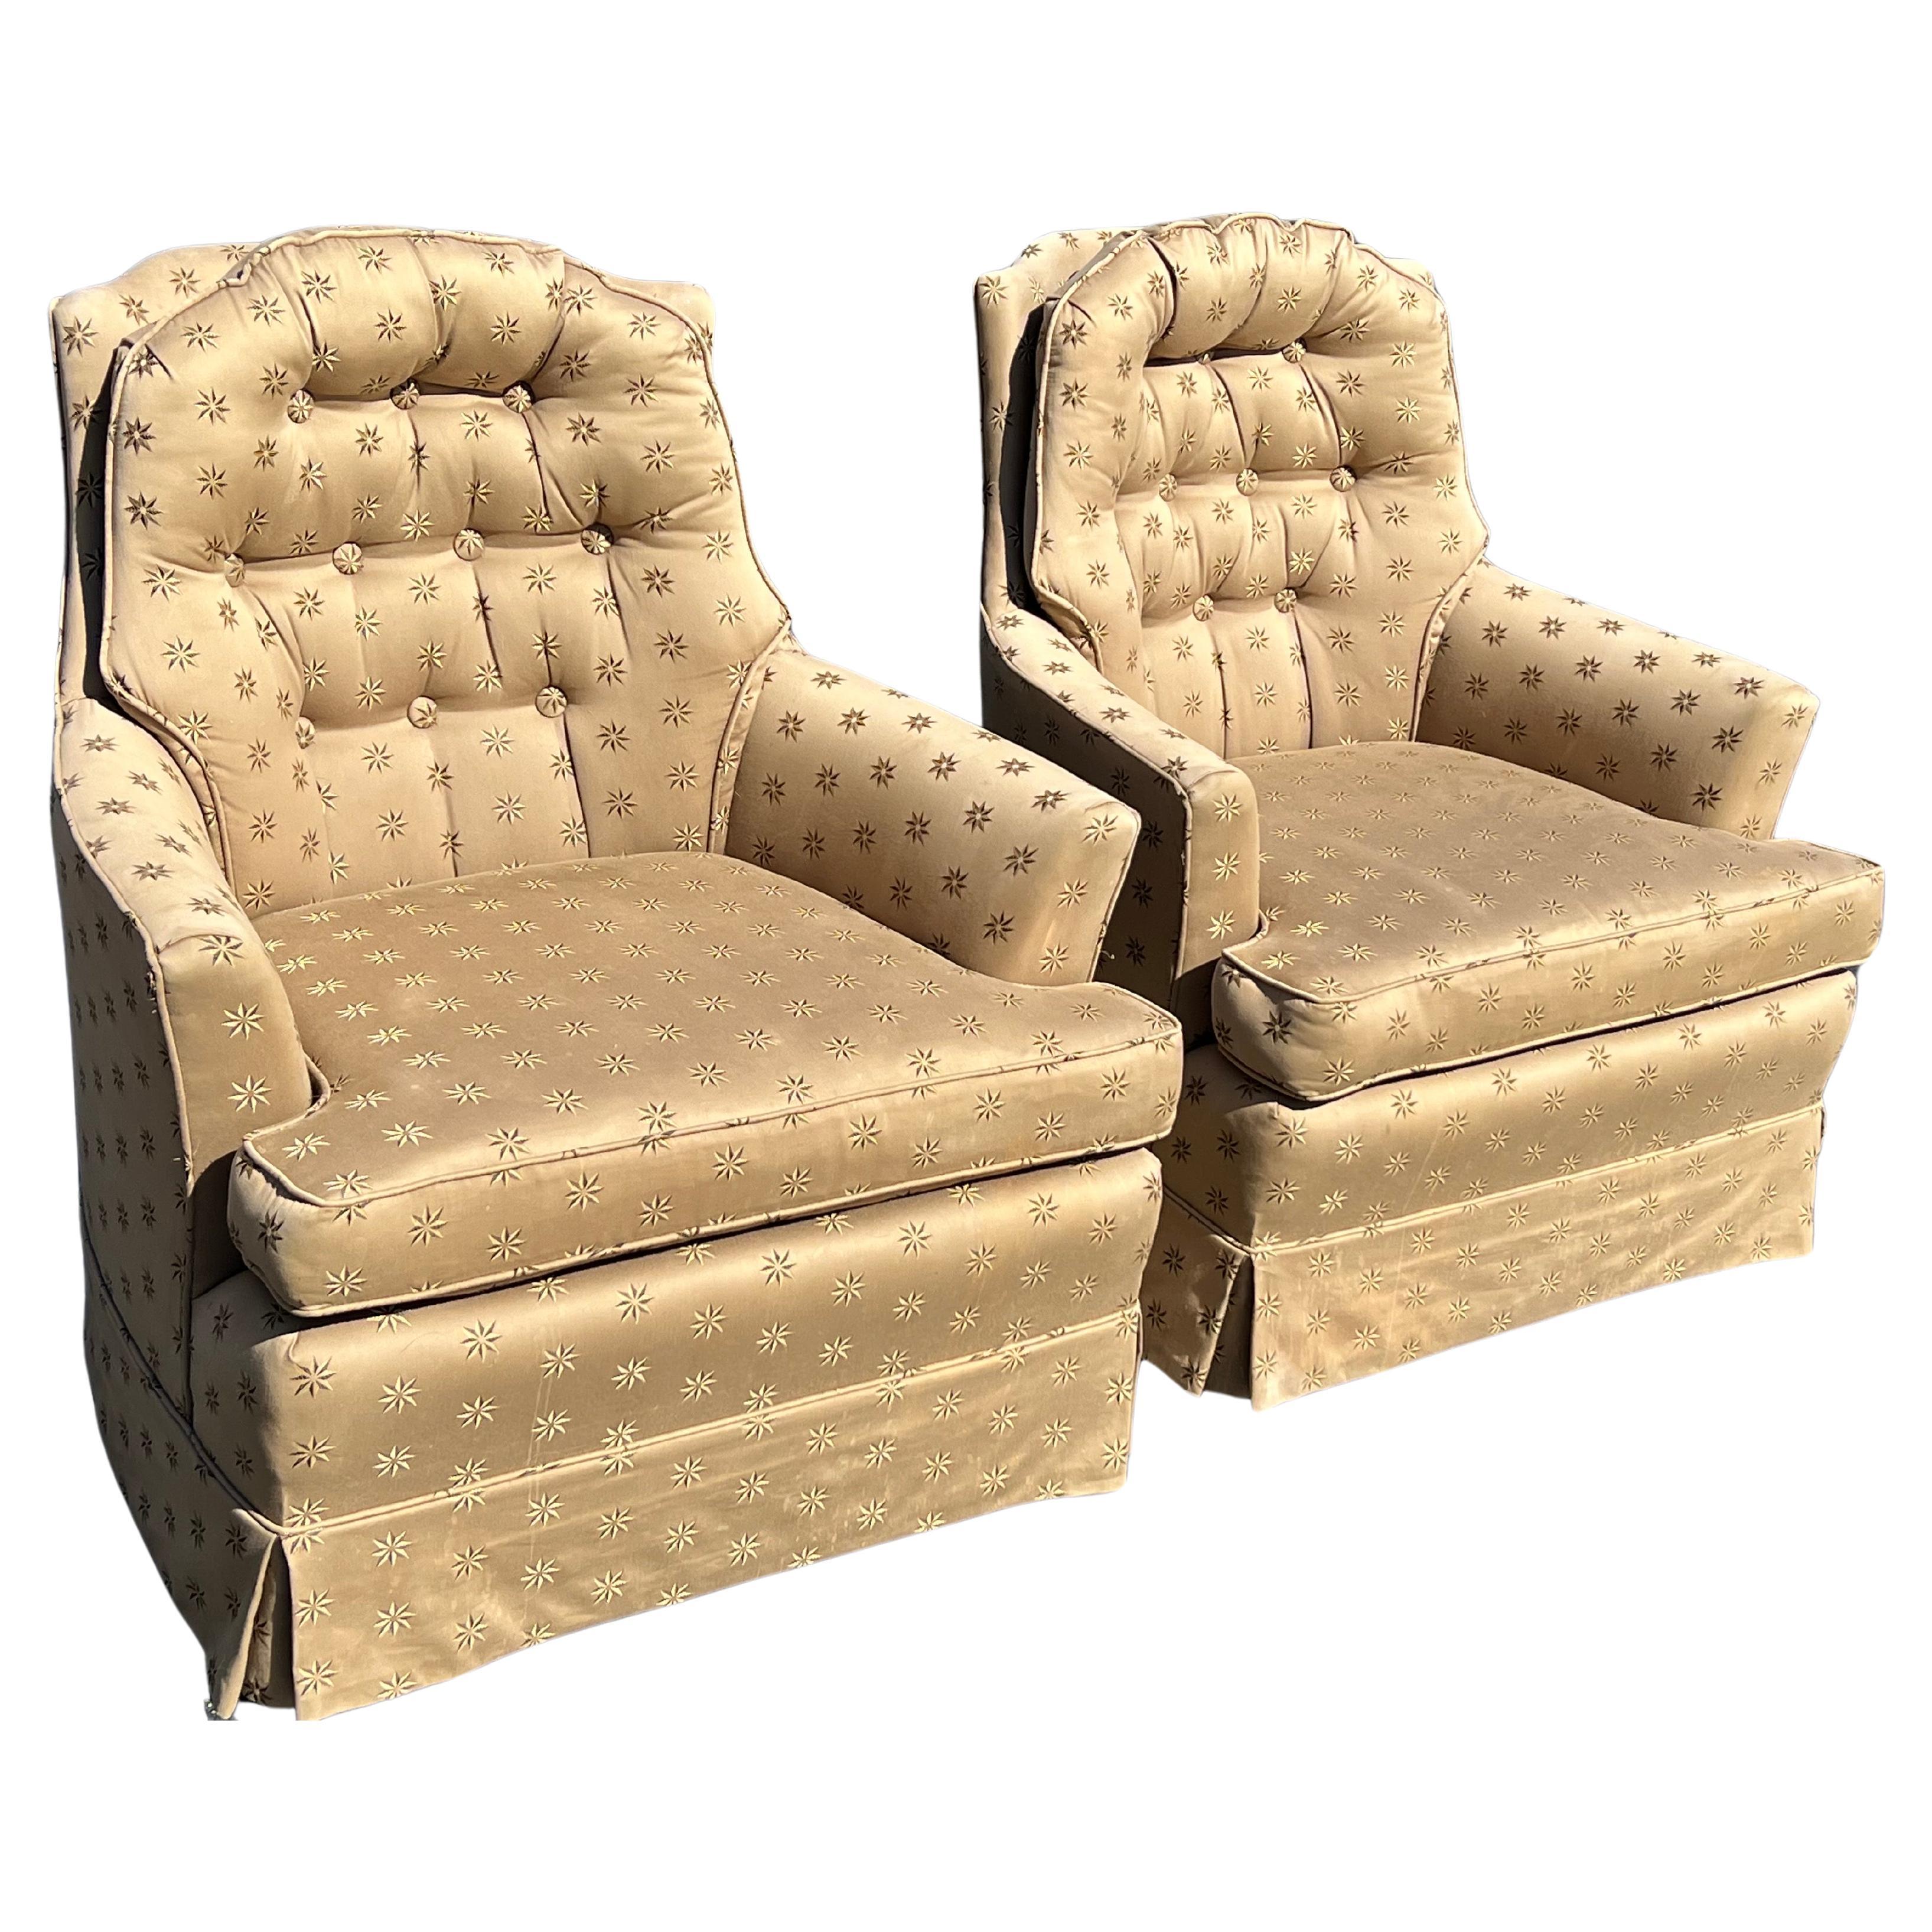 Pair of Upholstered Arm Chairs 